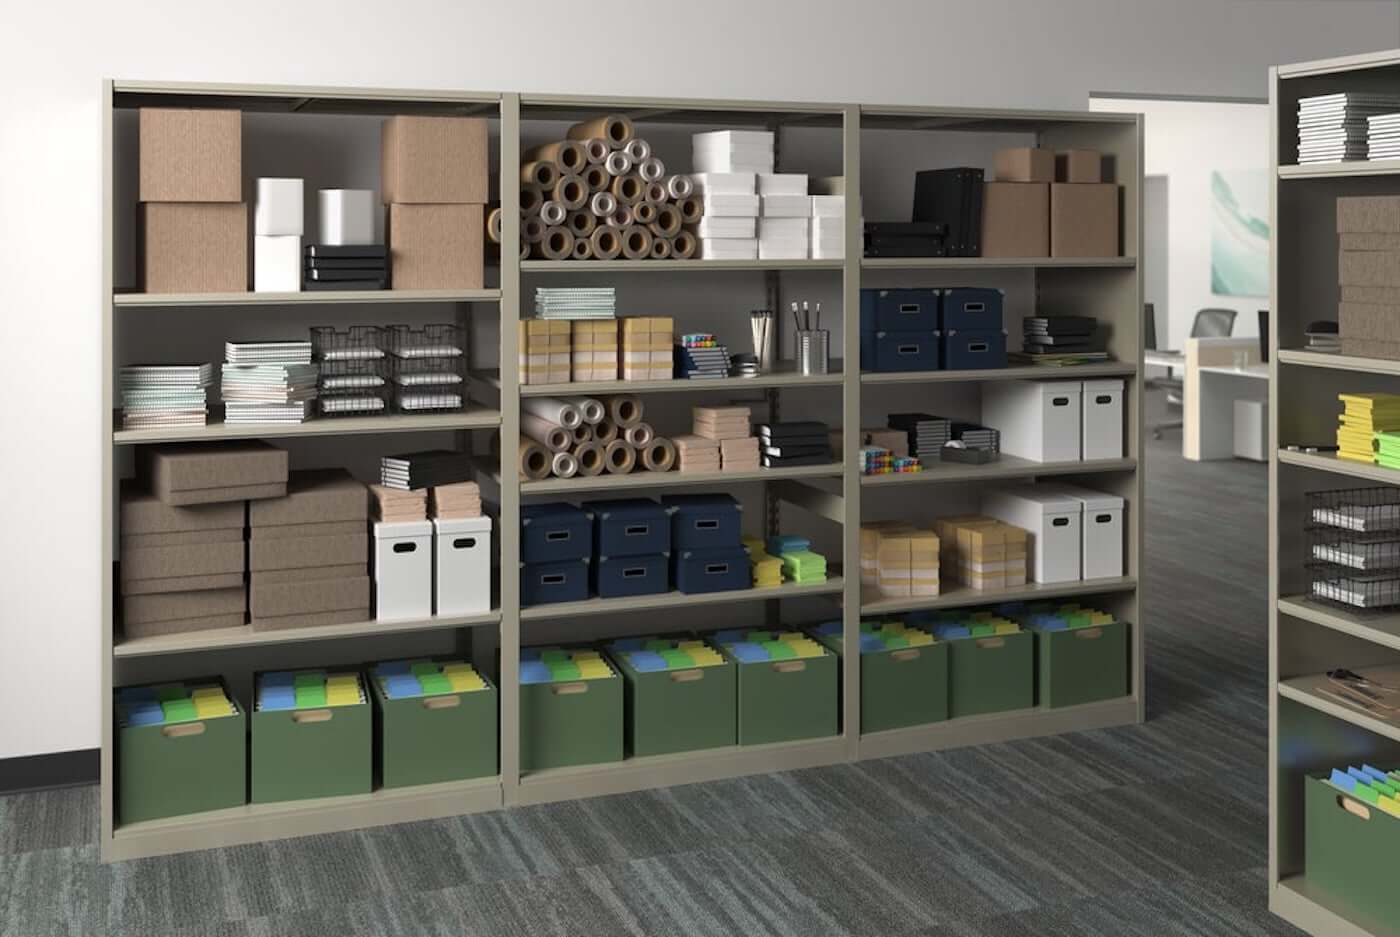 File Storage Ideas: How To Organize Your Archives Using Shelving